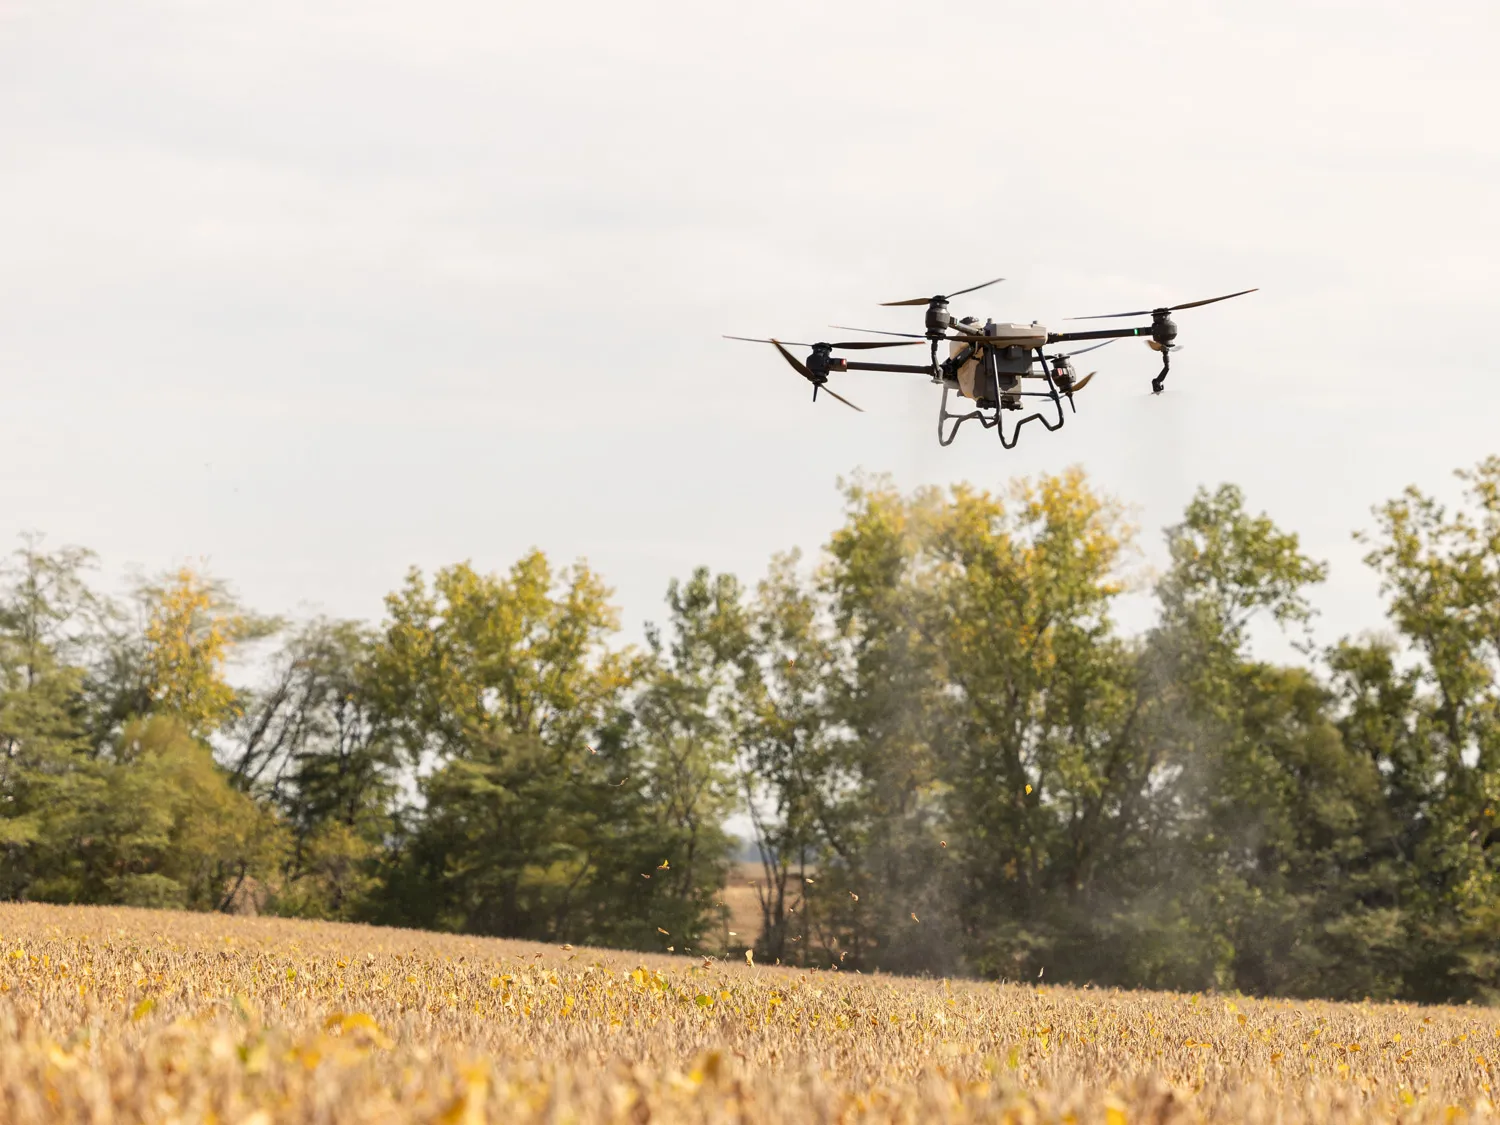 A drone flies above an out-of-focus field that is likely winter corn. In the distance there is a line of trees. The helicopter-like drone has three propellers pointing up, two sprayers on propeller arms pointing down, and thick wire stands hanging down from front and back. 